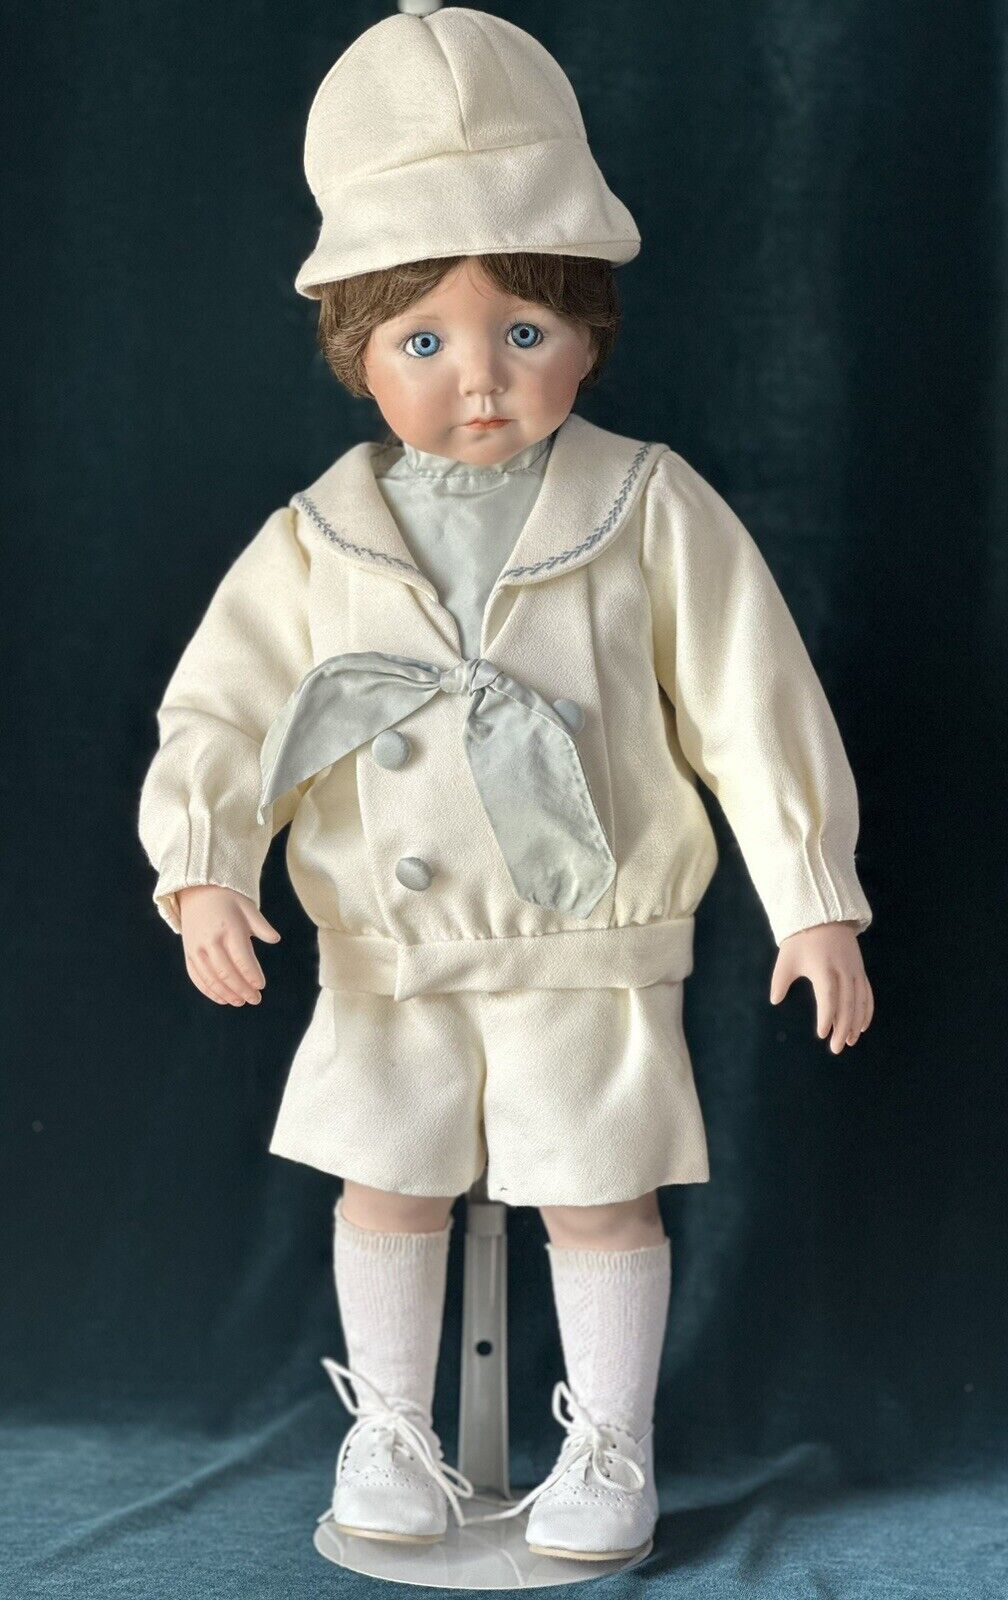 Artist Reproduction Of “Kayla” by Dianna Effner 18” Doll